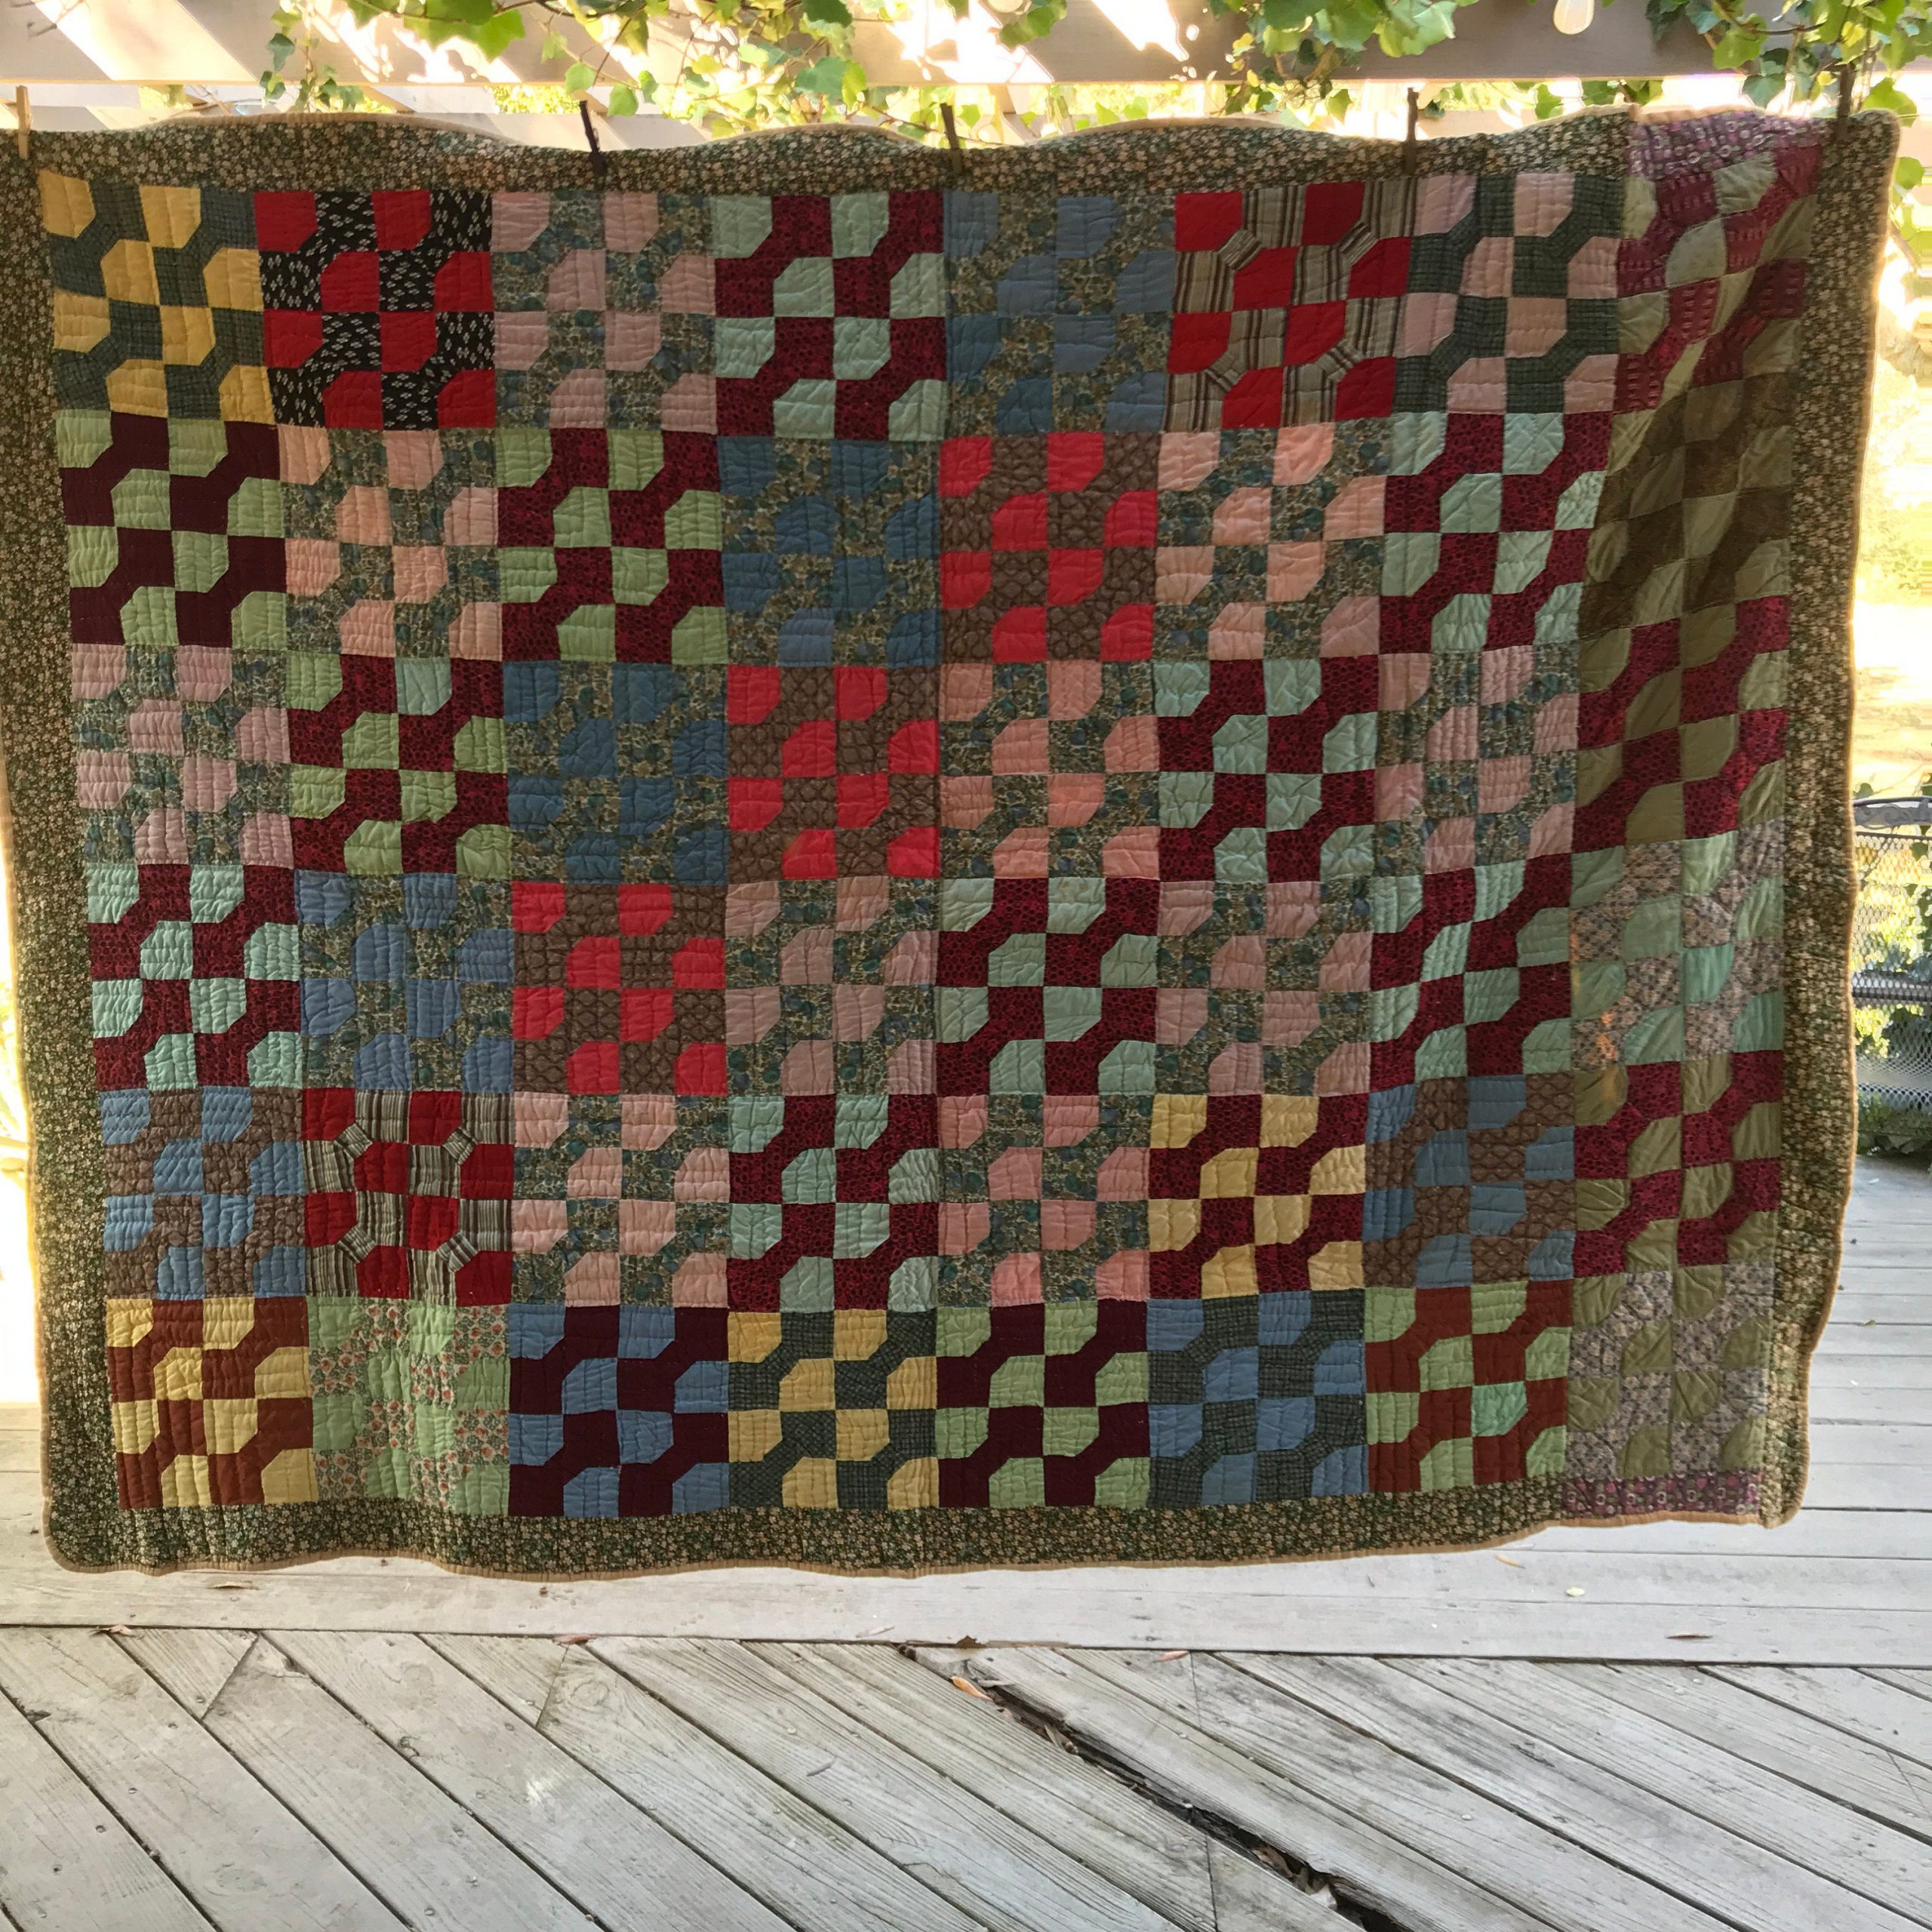 Antique Quilt Hand stitched hand made multi-colored hand made 1930's ...